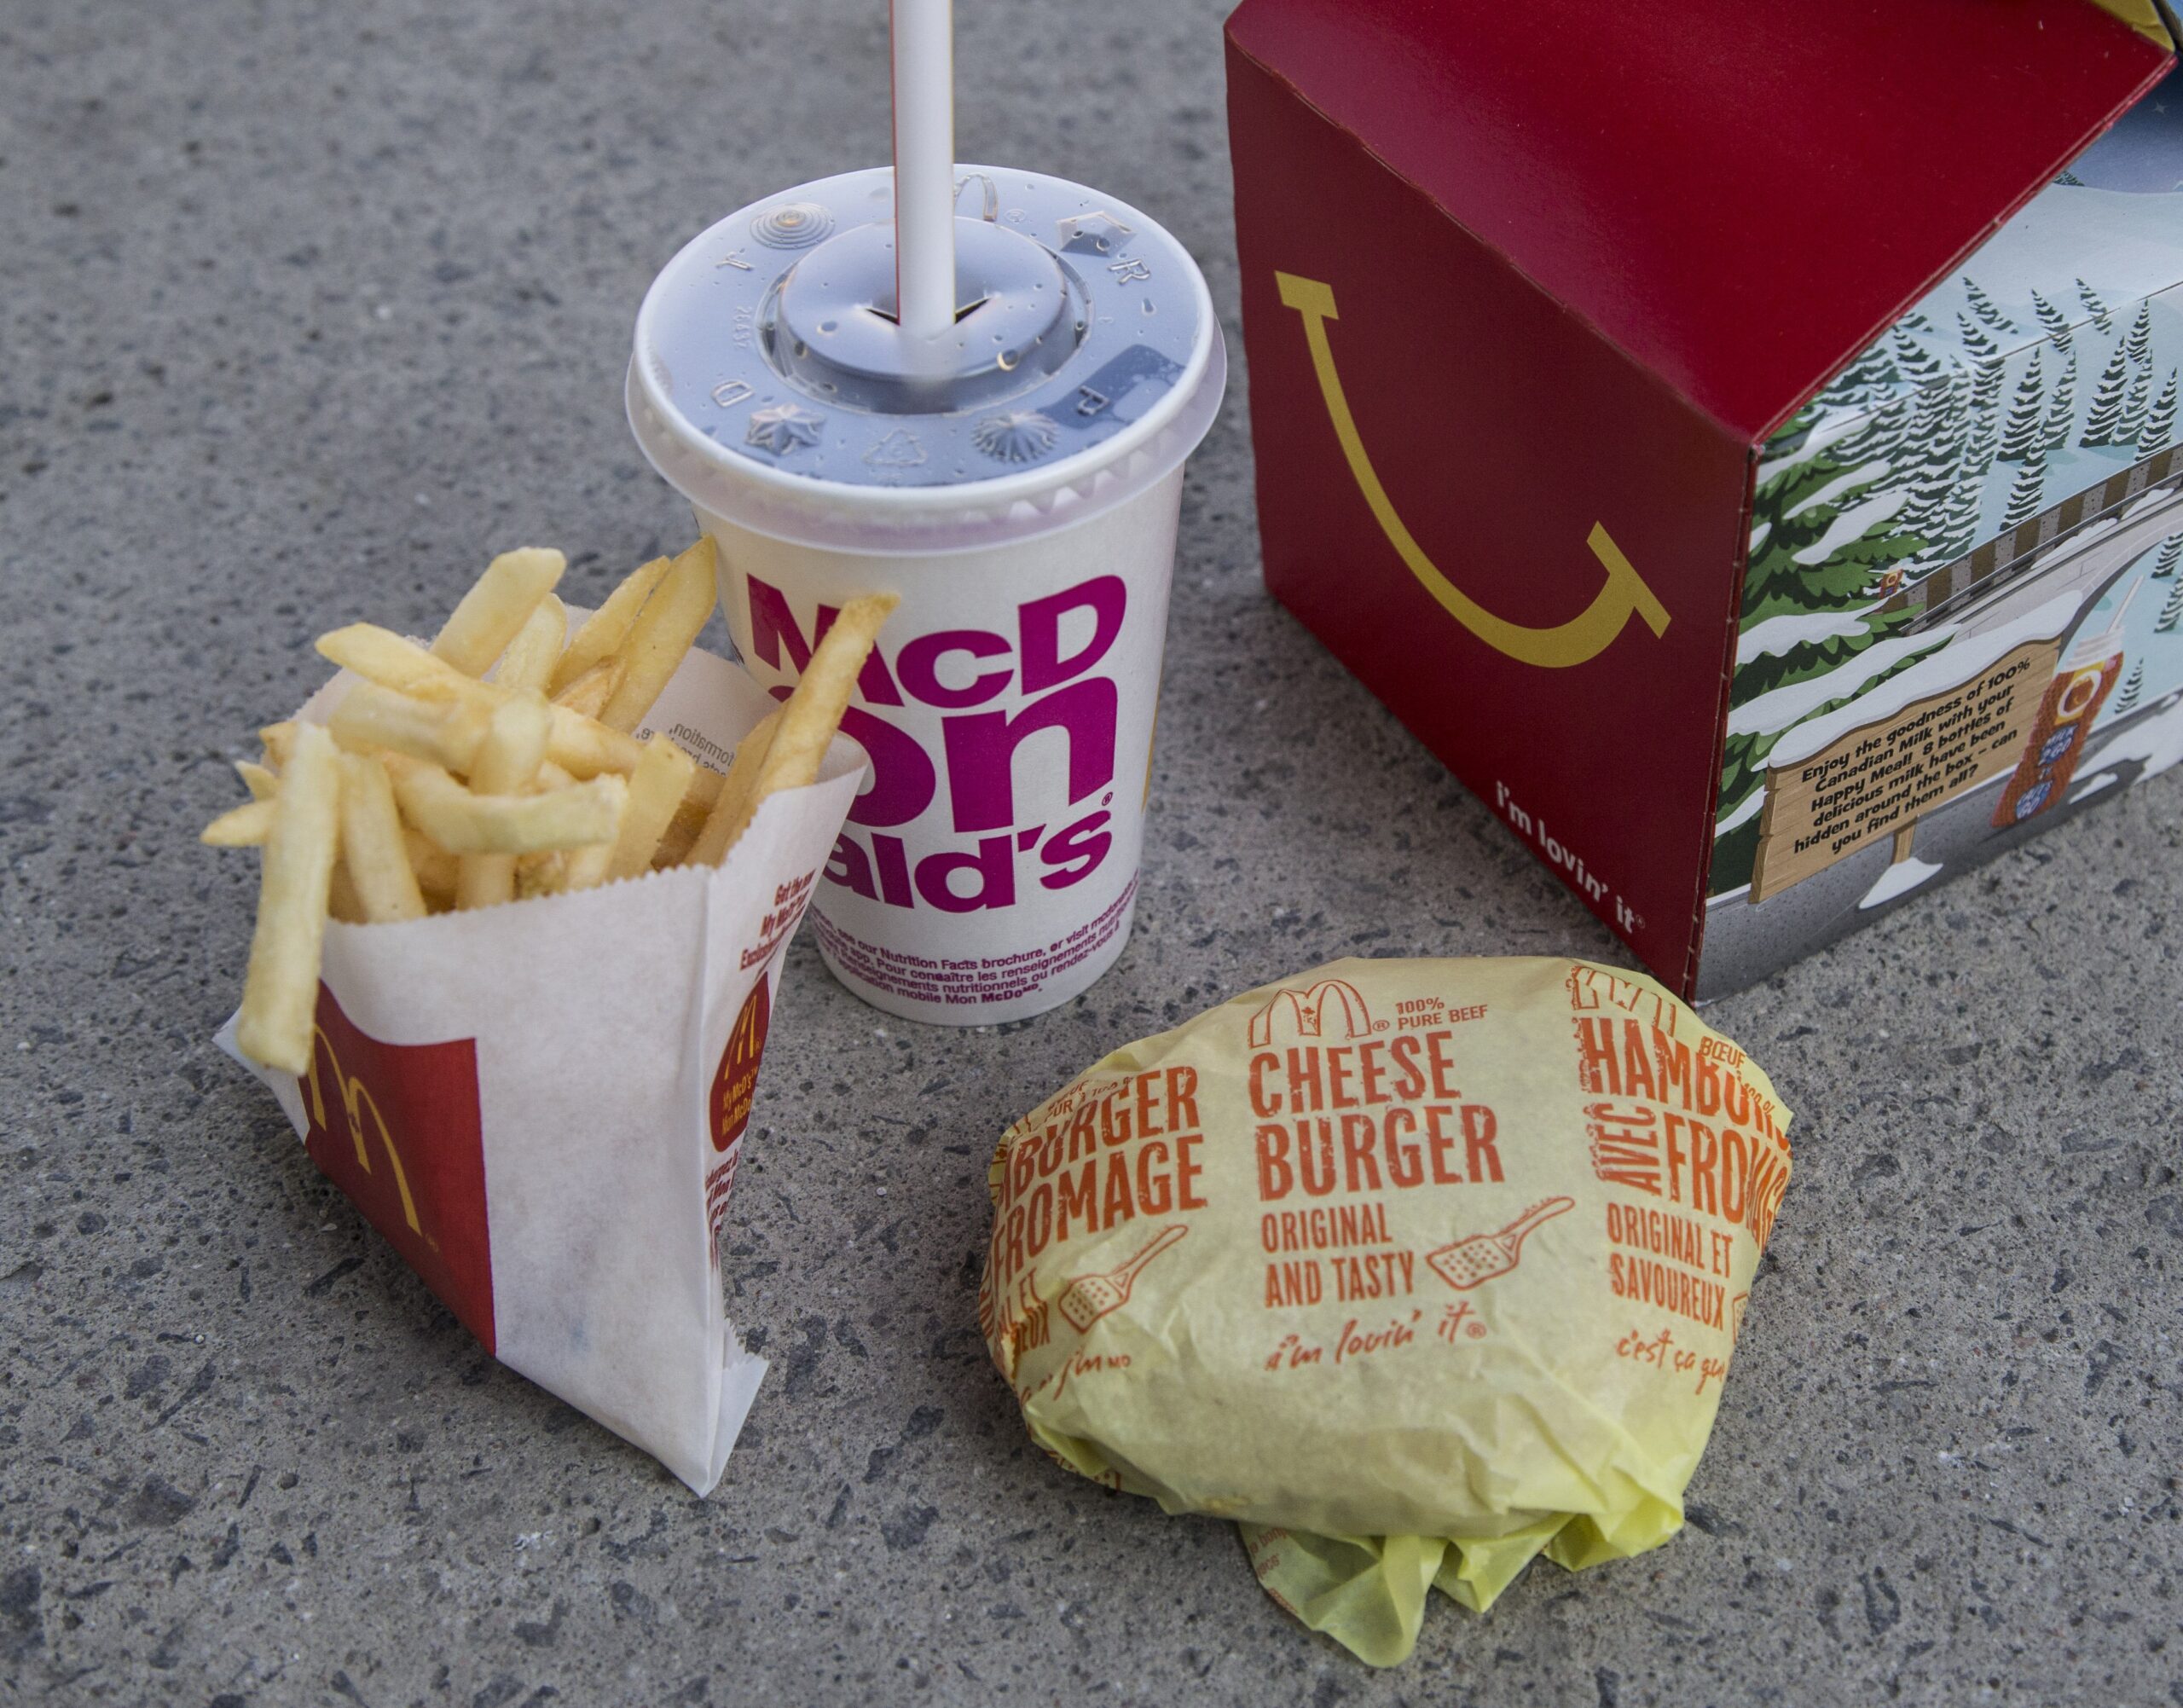 McDonald’s to remove cheeseburgers from Happy Meal menu